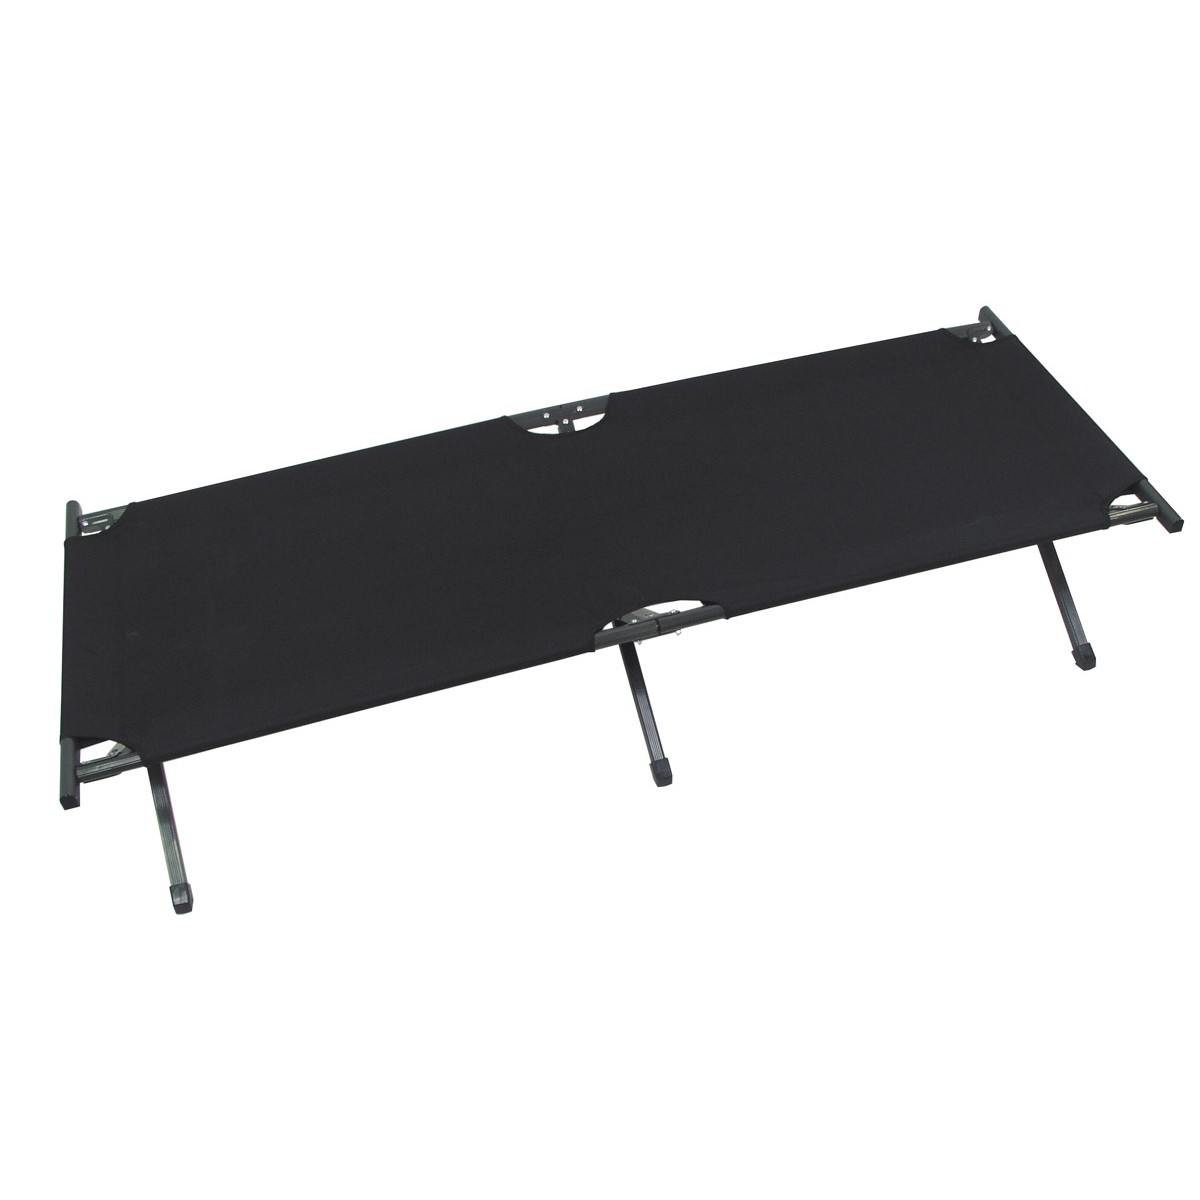 US Army Camp Bed - Black